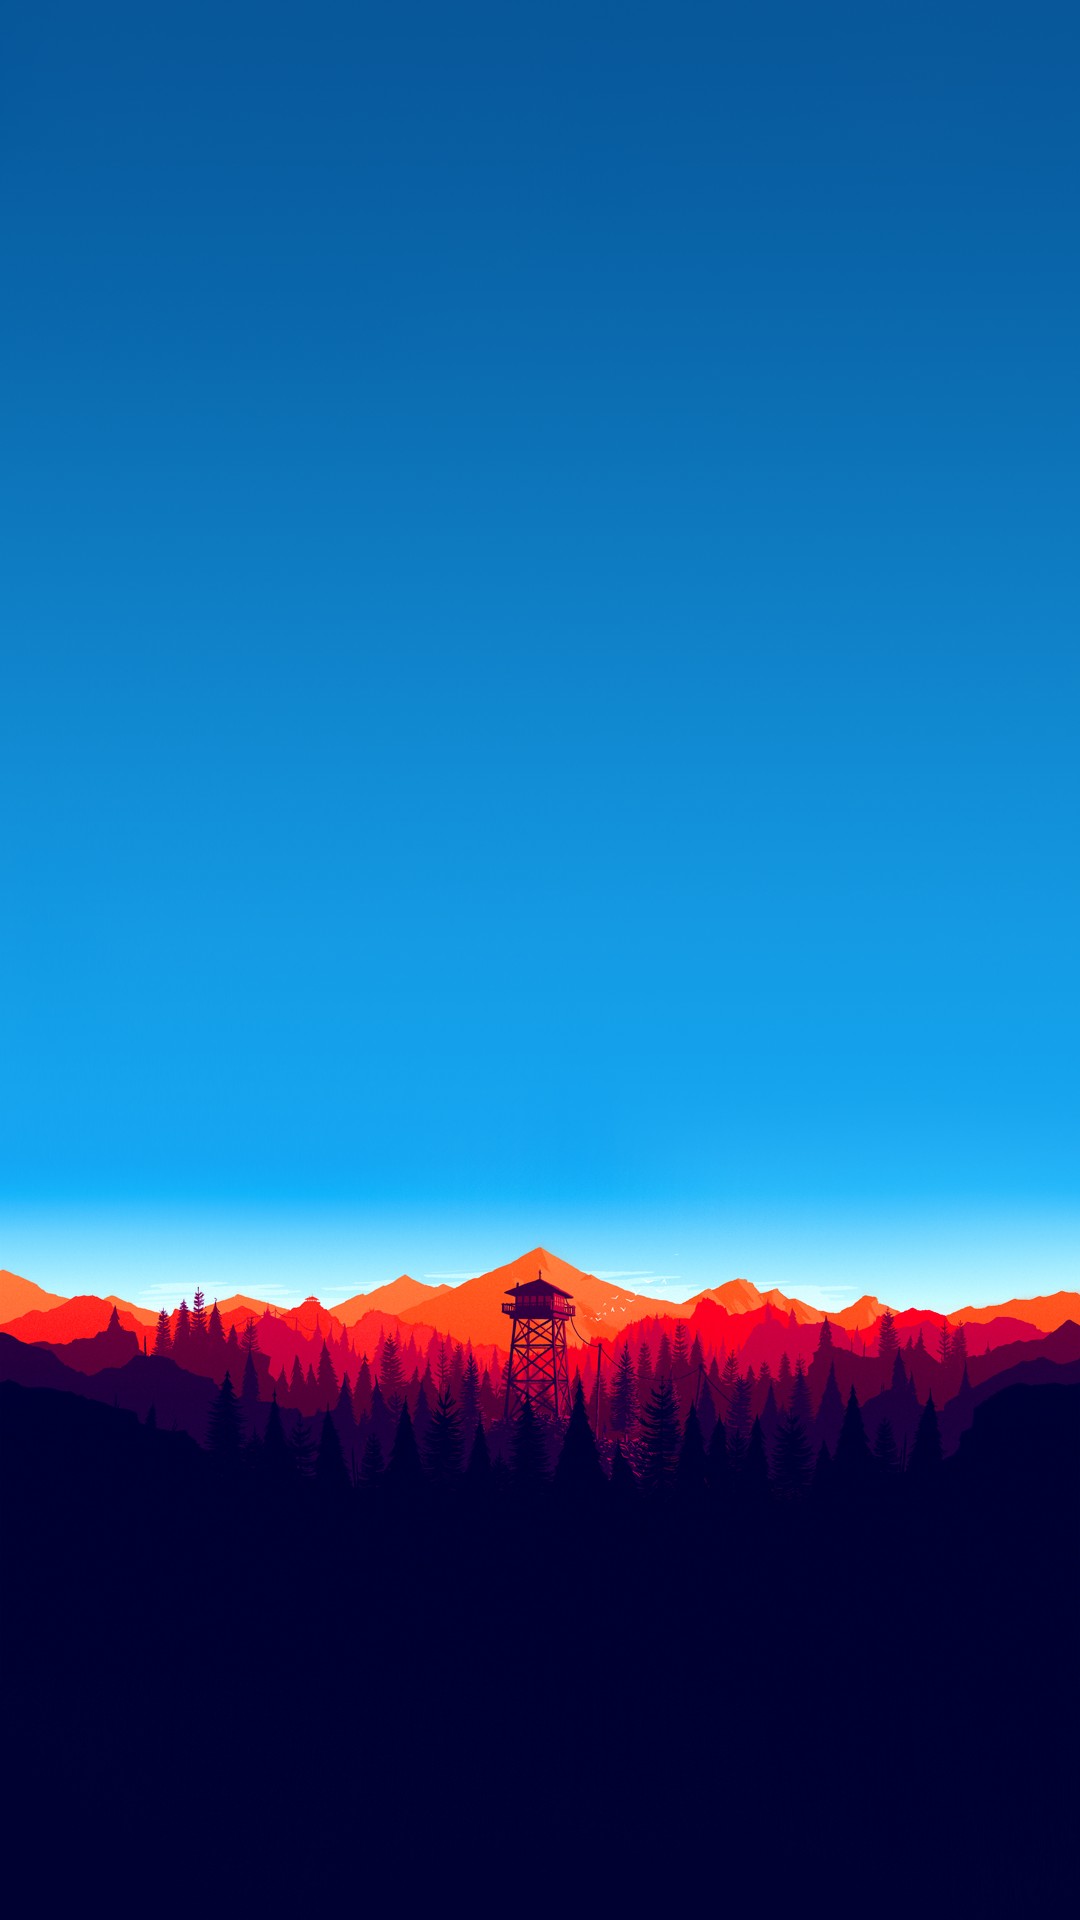 Wallpaper Firewatch Best Games game quest horror PC PS4 Games 8462